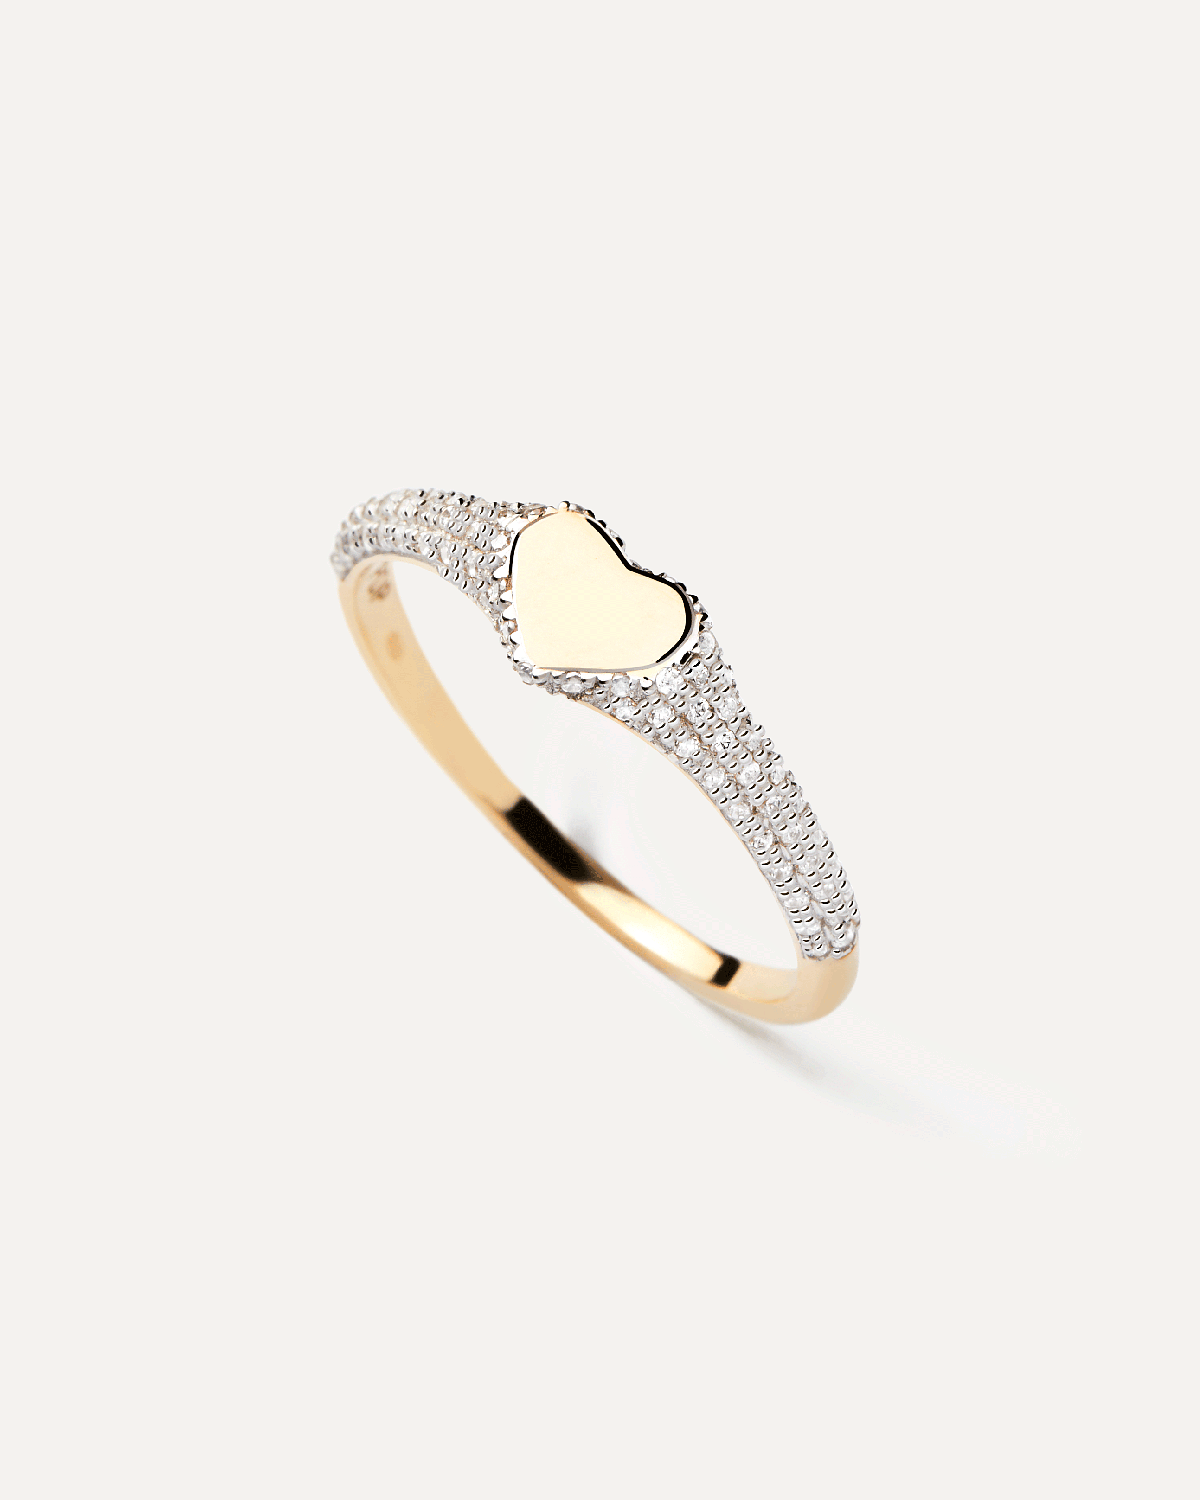 2024 Selection | Diamonds and Gold Heart Stamp Ring. Heart-shaped signet ring in solid yellow gold set with 76 pavé diamonds of 0.23 carats. Get the latest arrival from PDPAOLA. Place your order safely and get this Best Seller. Free Shipping.